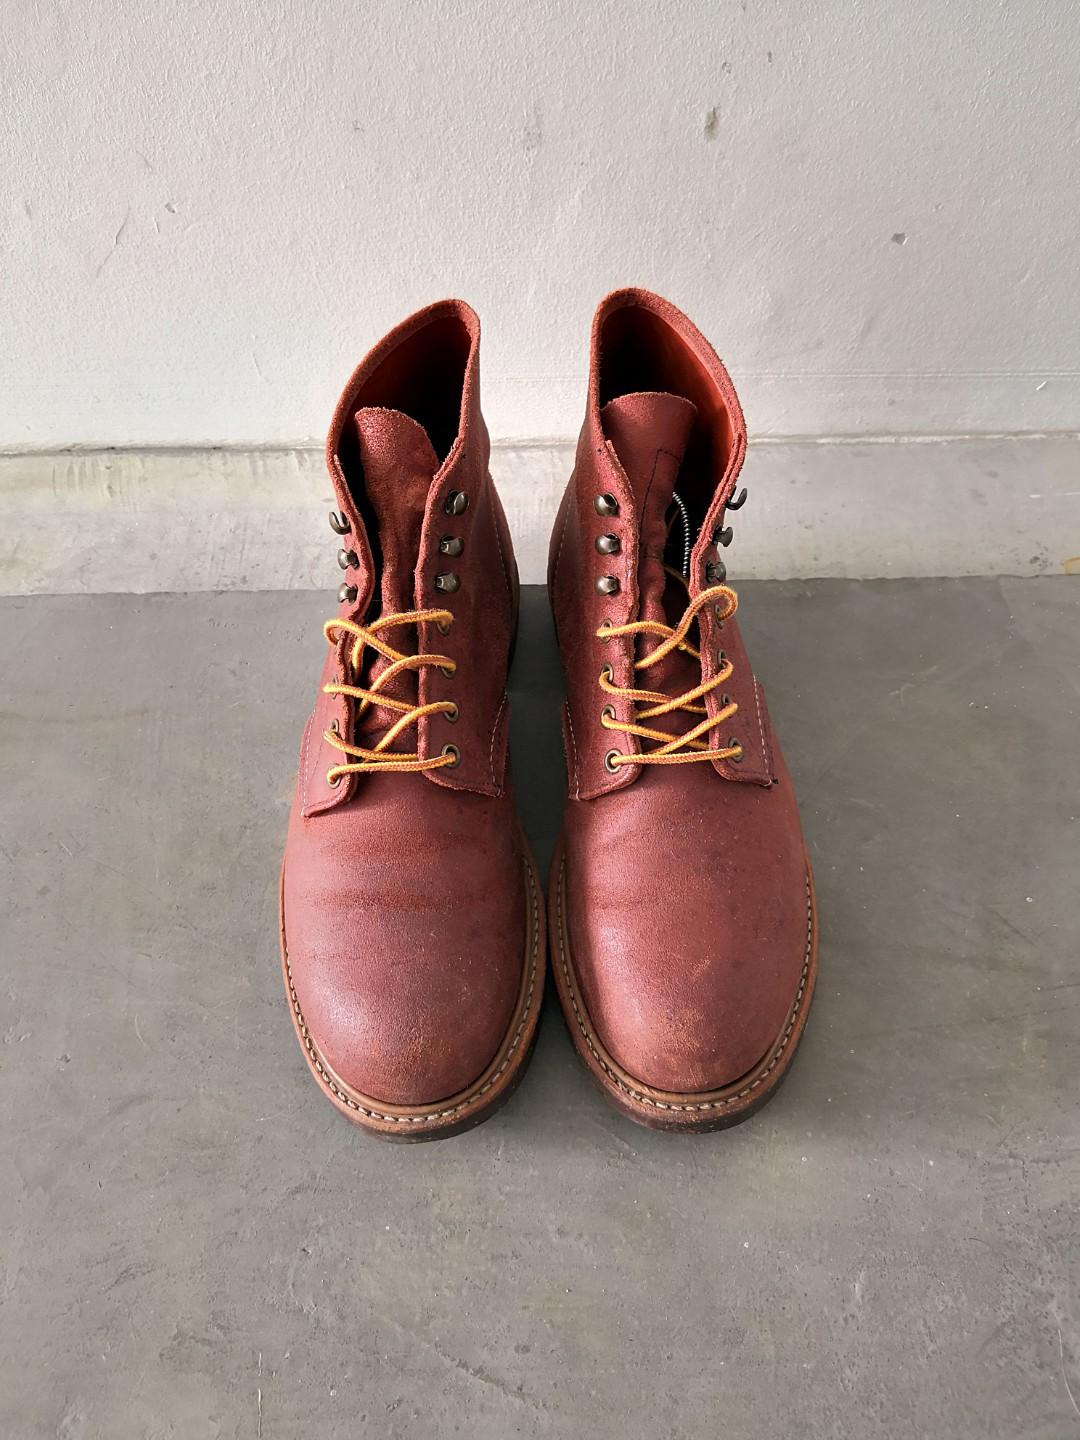 Red Wing Blacksmith Bordeaux Spitfire 